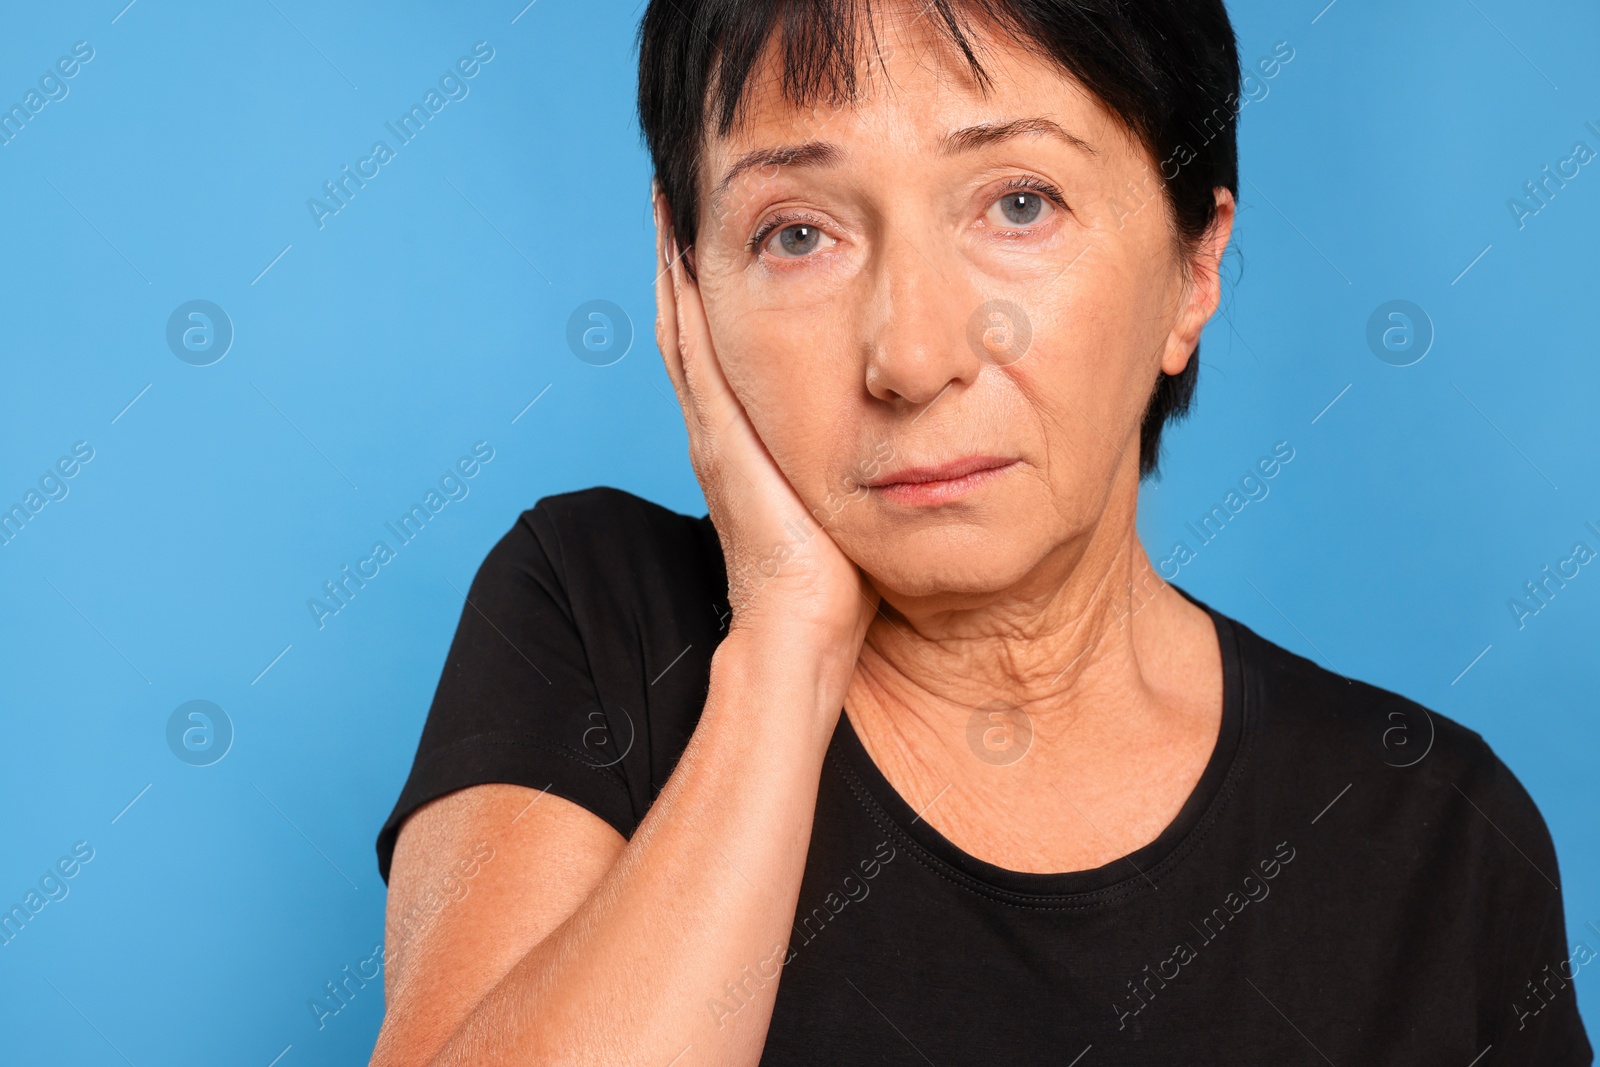 Photo of Senior woman suffering from ear pain on light blue background, closeup